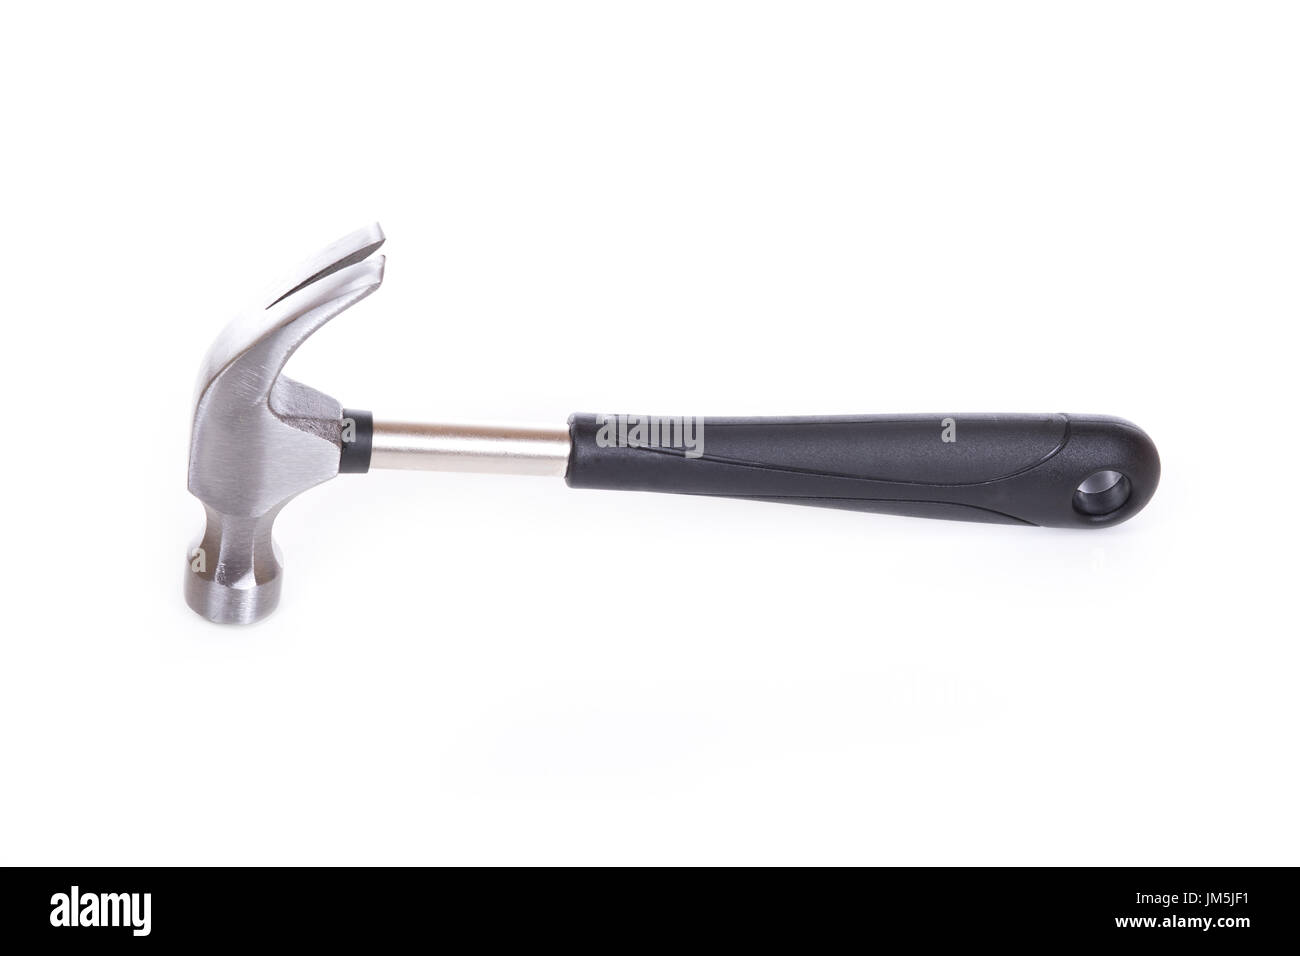 Traditional curved-claw hammer tool with black plastic handle viewed from the side horizontally isolated on white background with copy space Stock Photo